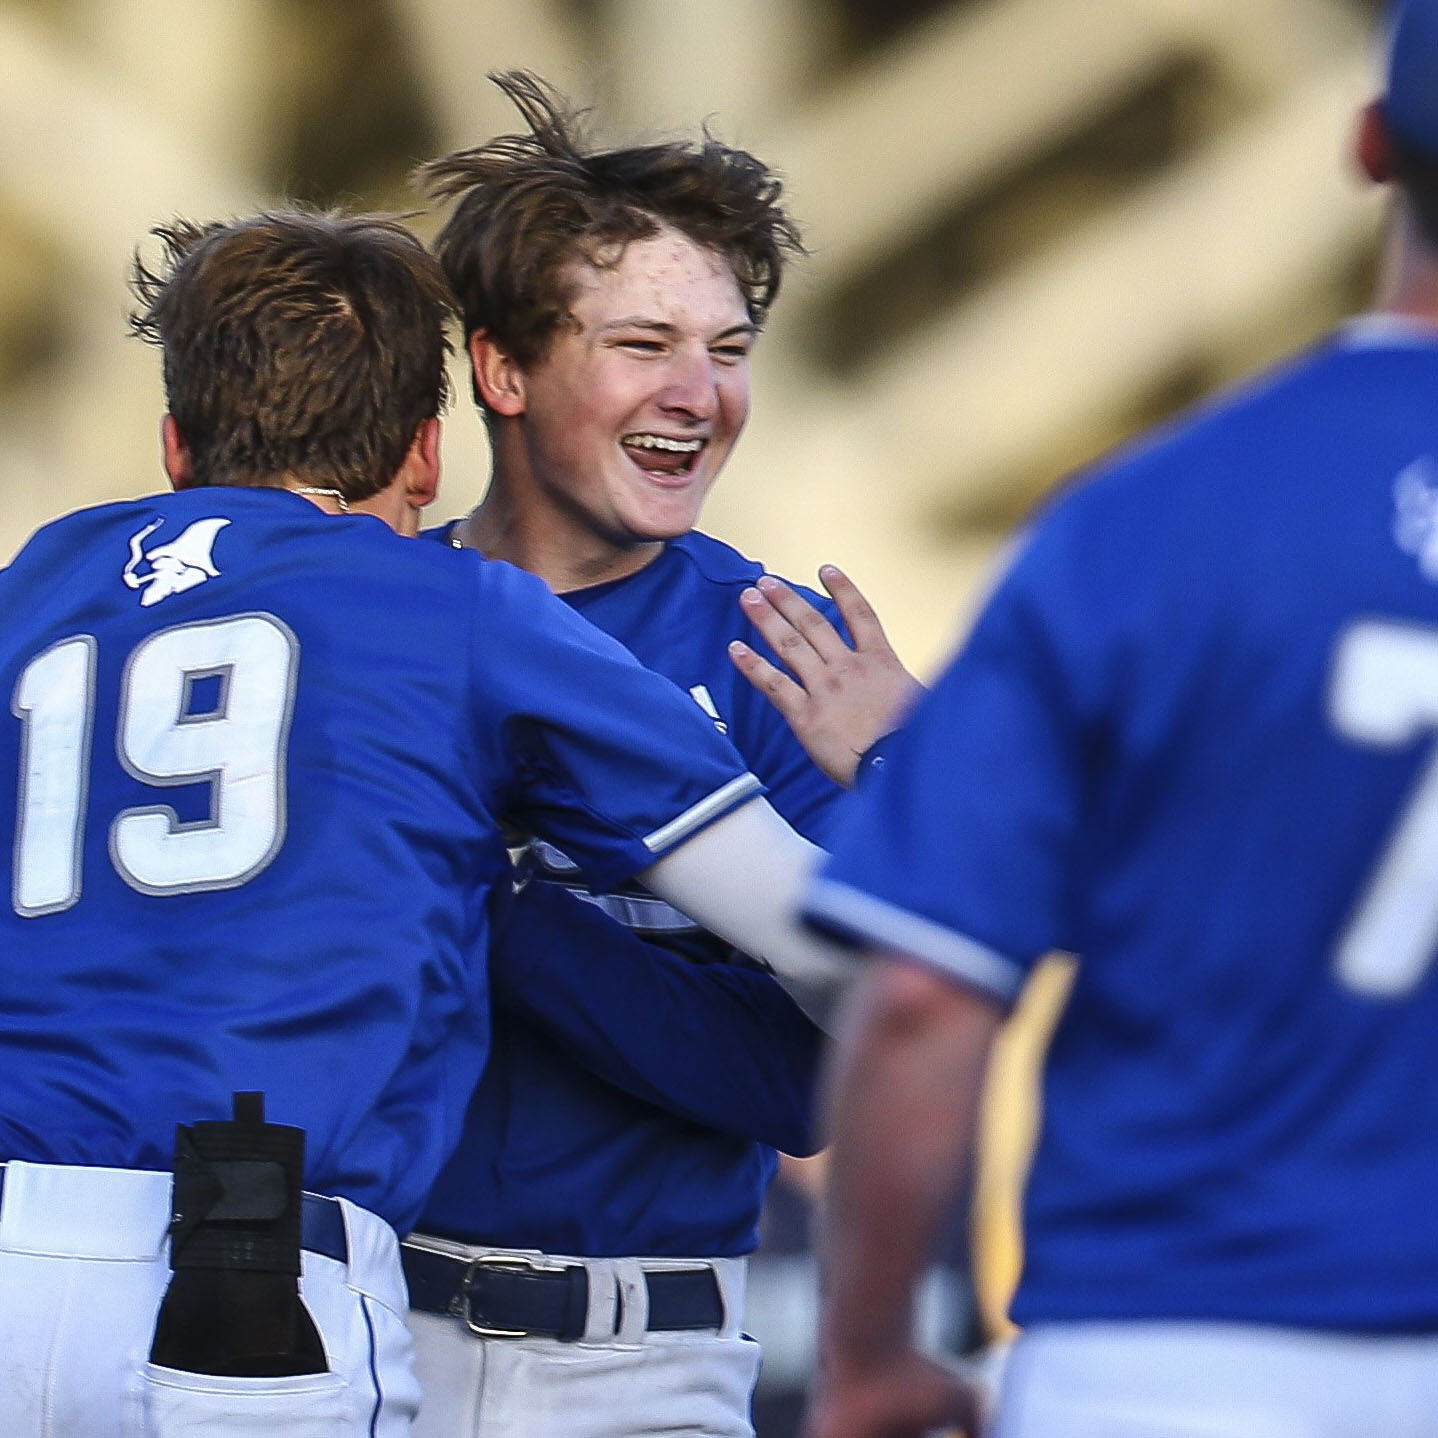 Who's going to make the state baseball tournament in the 6A-West?